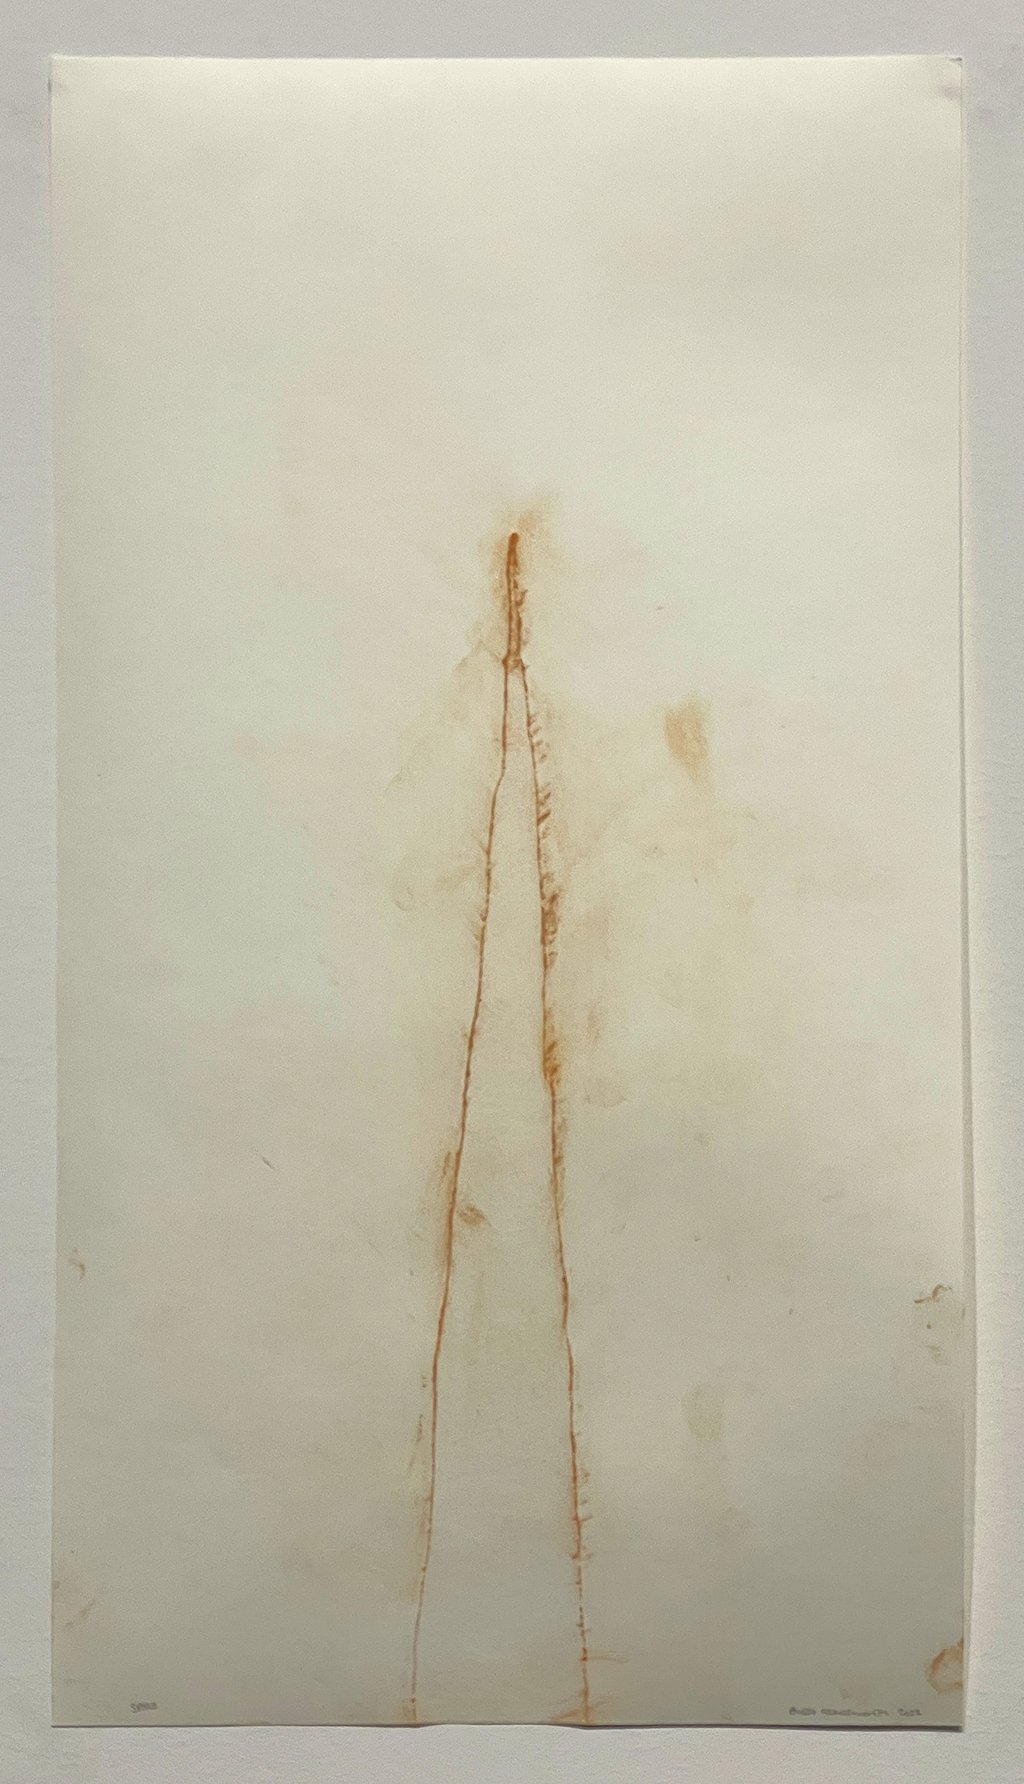  Andy Goldsworthy,  Spire , 2022 Debossed watercolor paper with red earth, Signed, titled and dated on front | 31 x 17 inches | HG15949 